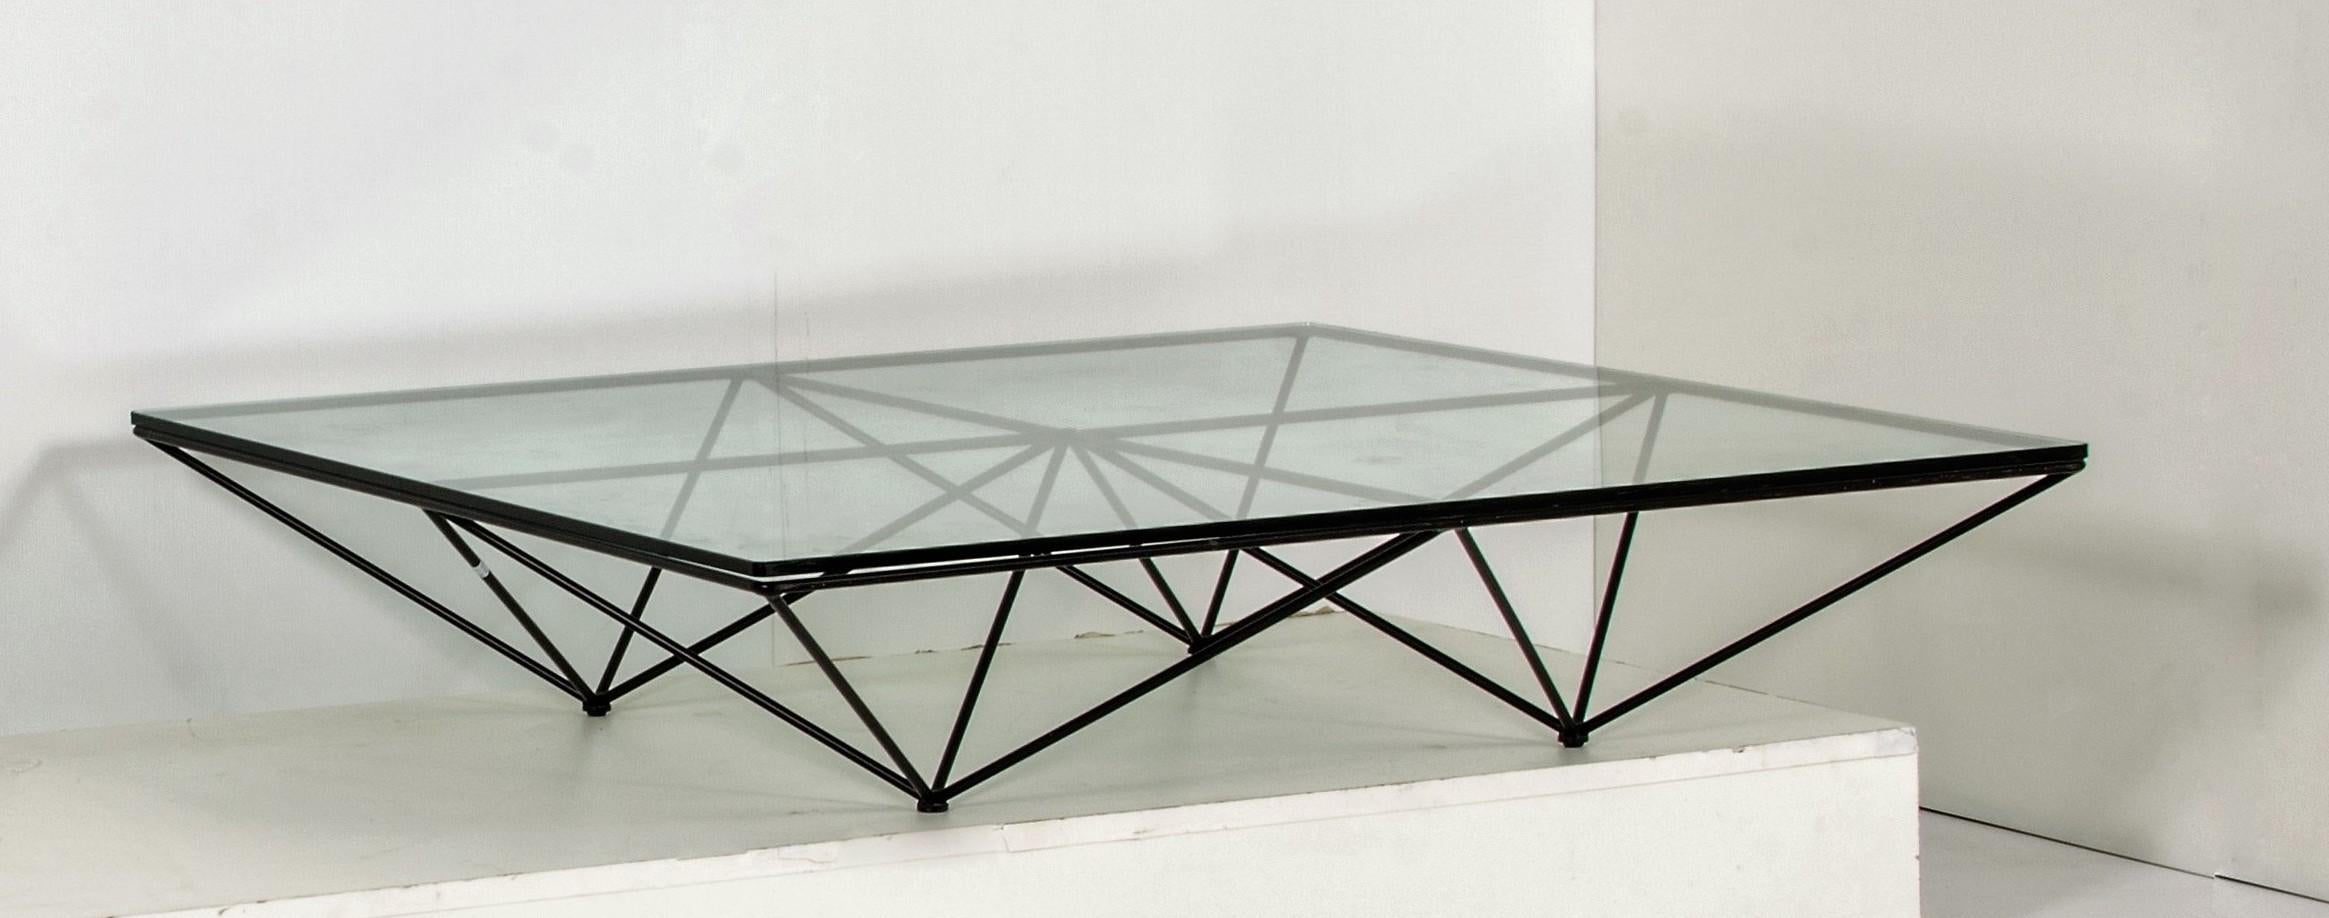 Production: B&B, structure in reinforcing steel painted black, surface of the table made of glass. Excellent conditions.